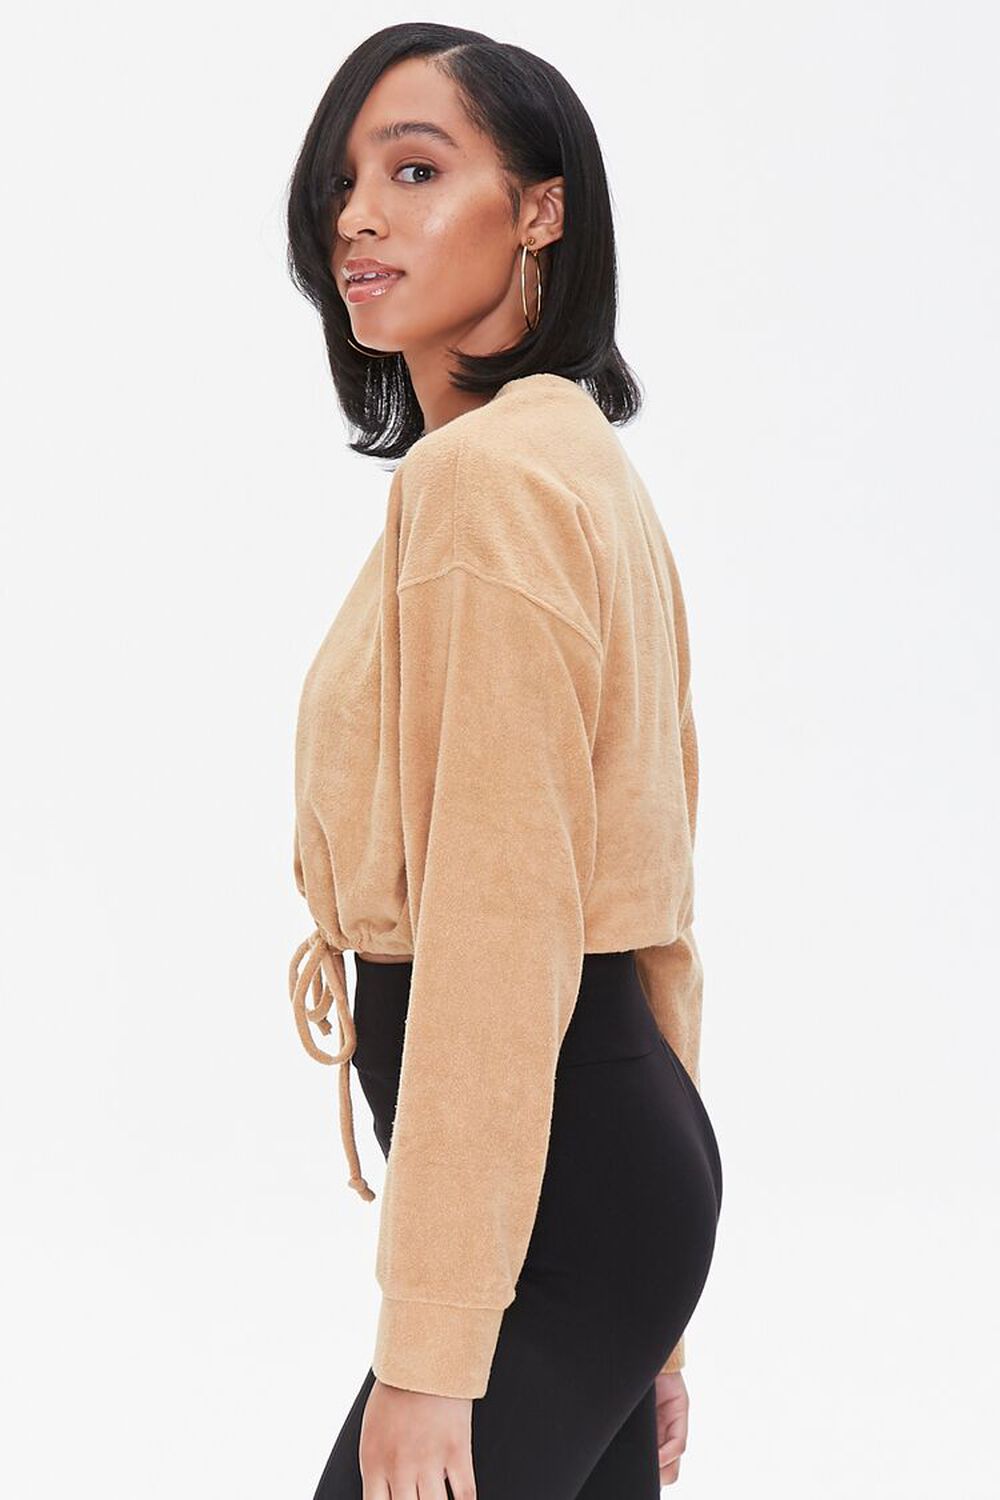 BROWN French Terry Drop-Sleeve Top, image 2